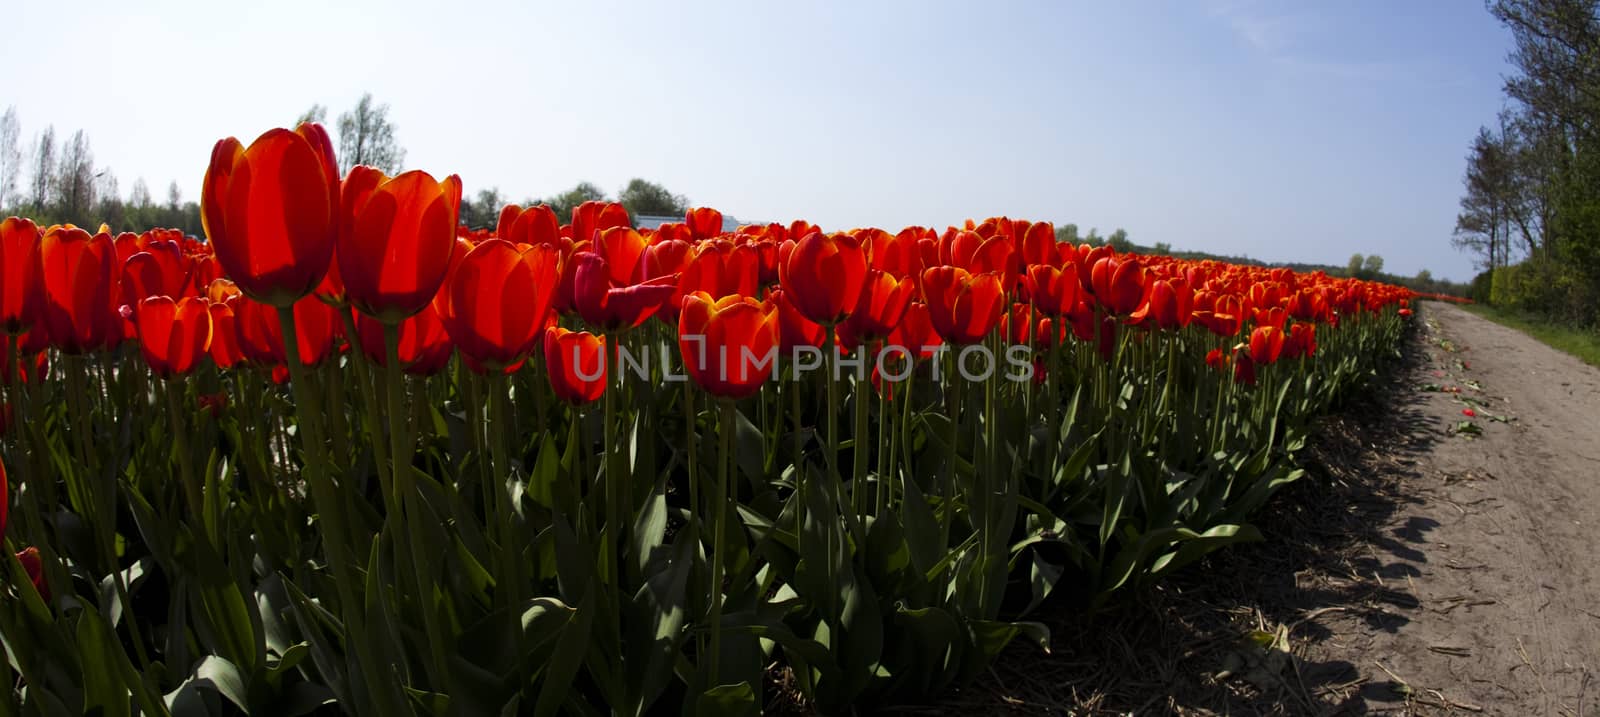 Flowers are blooming on the field, tulips by JanPietruszka